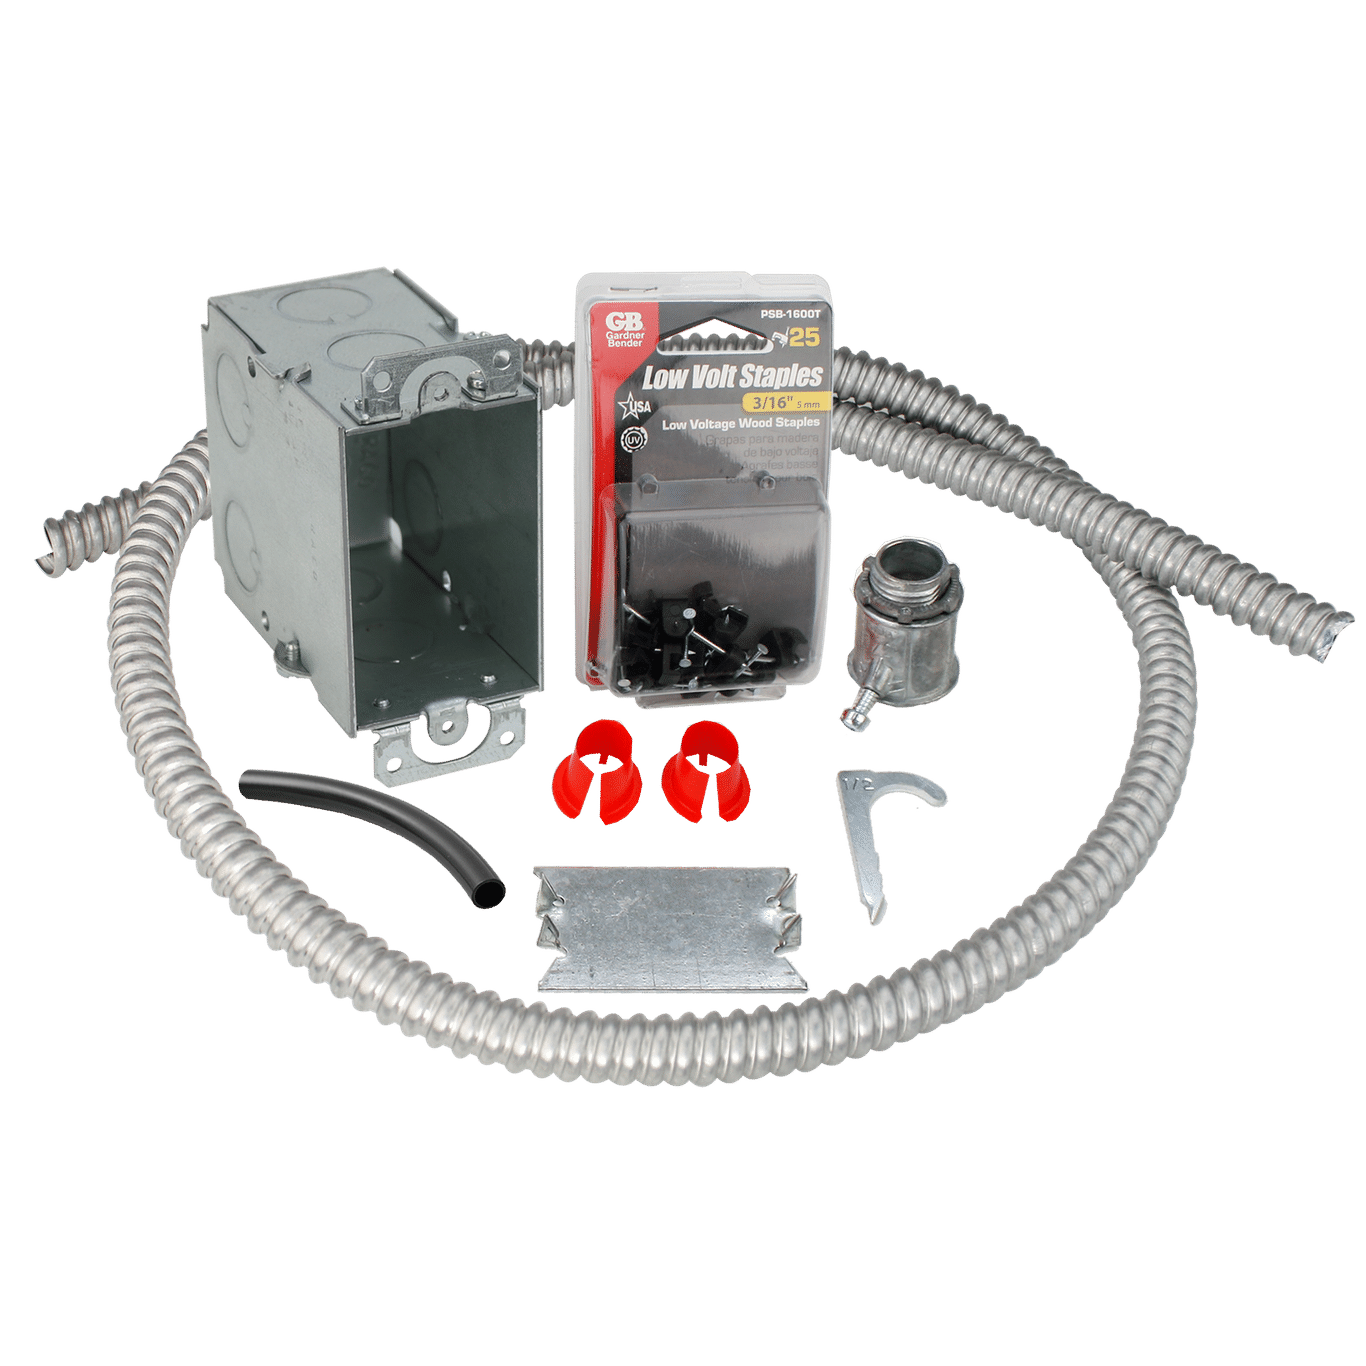 Electrical Rough-in Kit Single Gang Box with Single Conduit